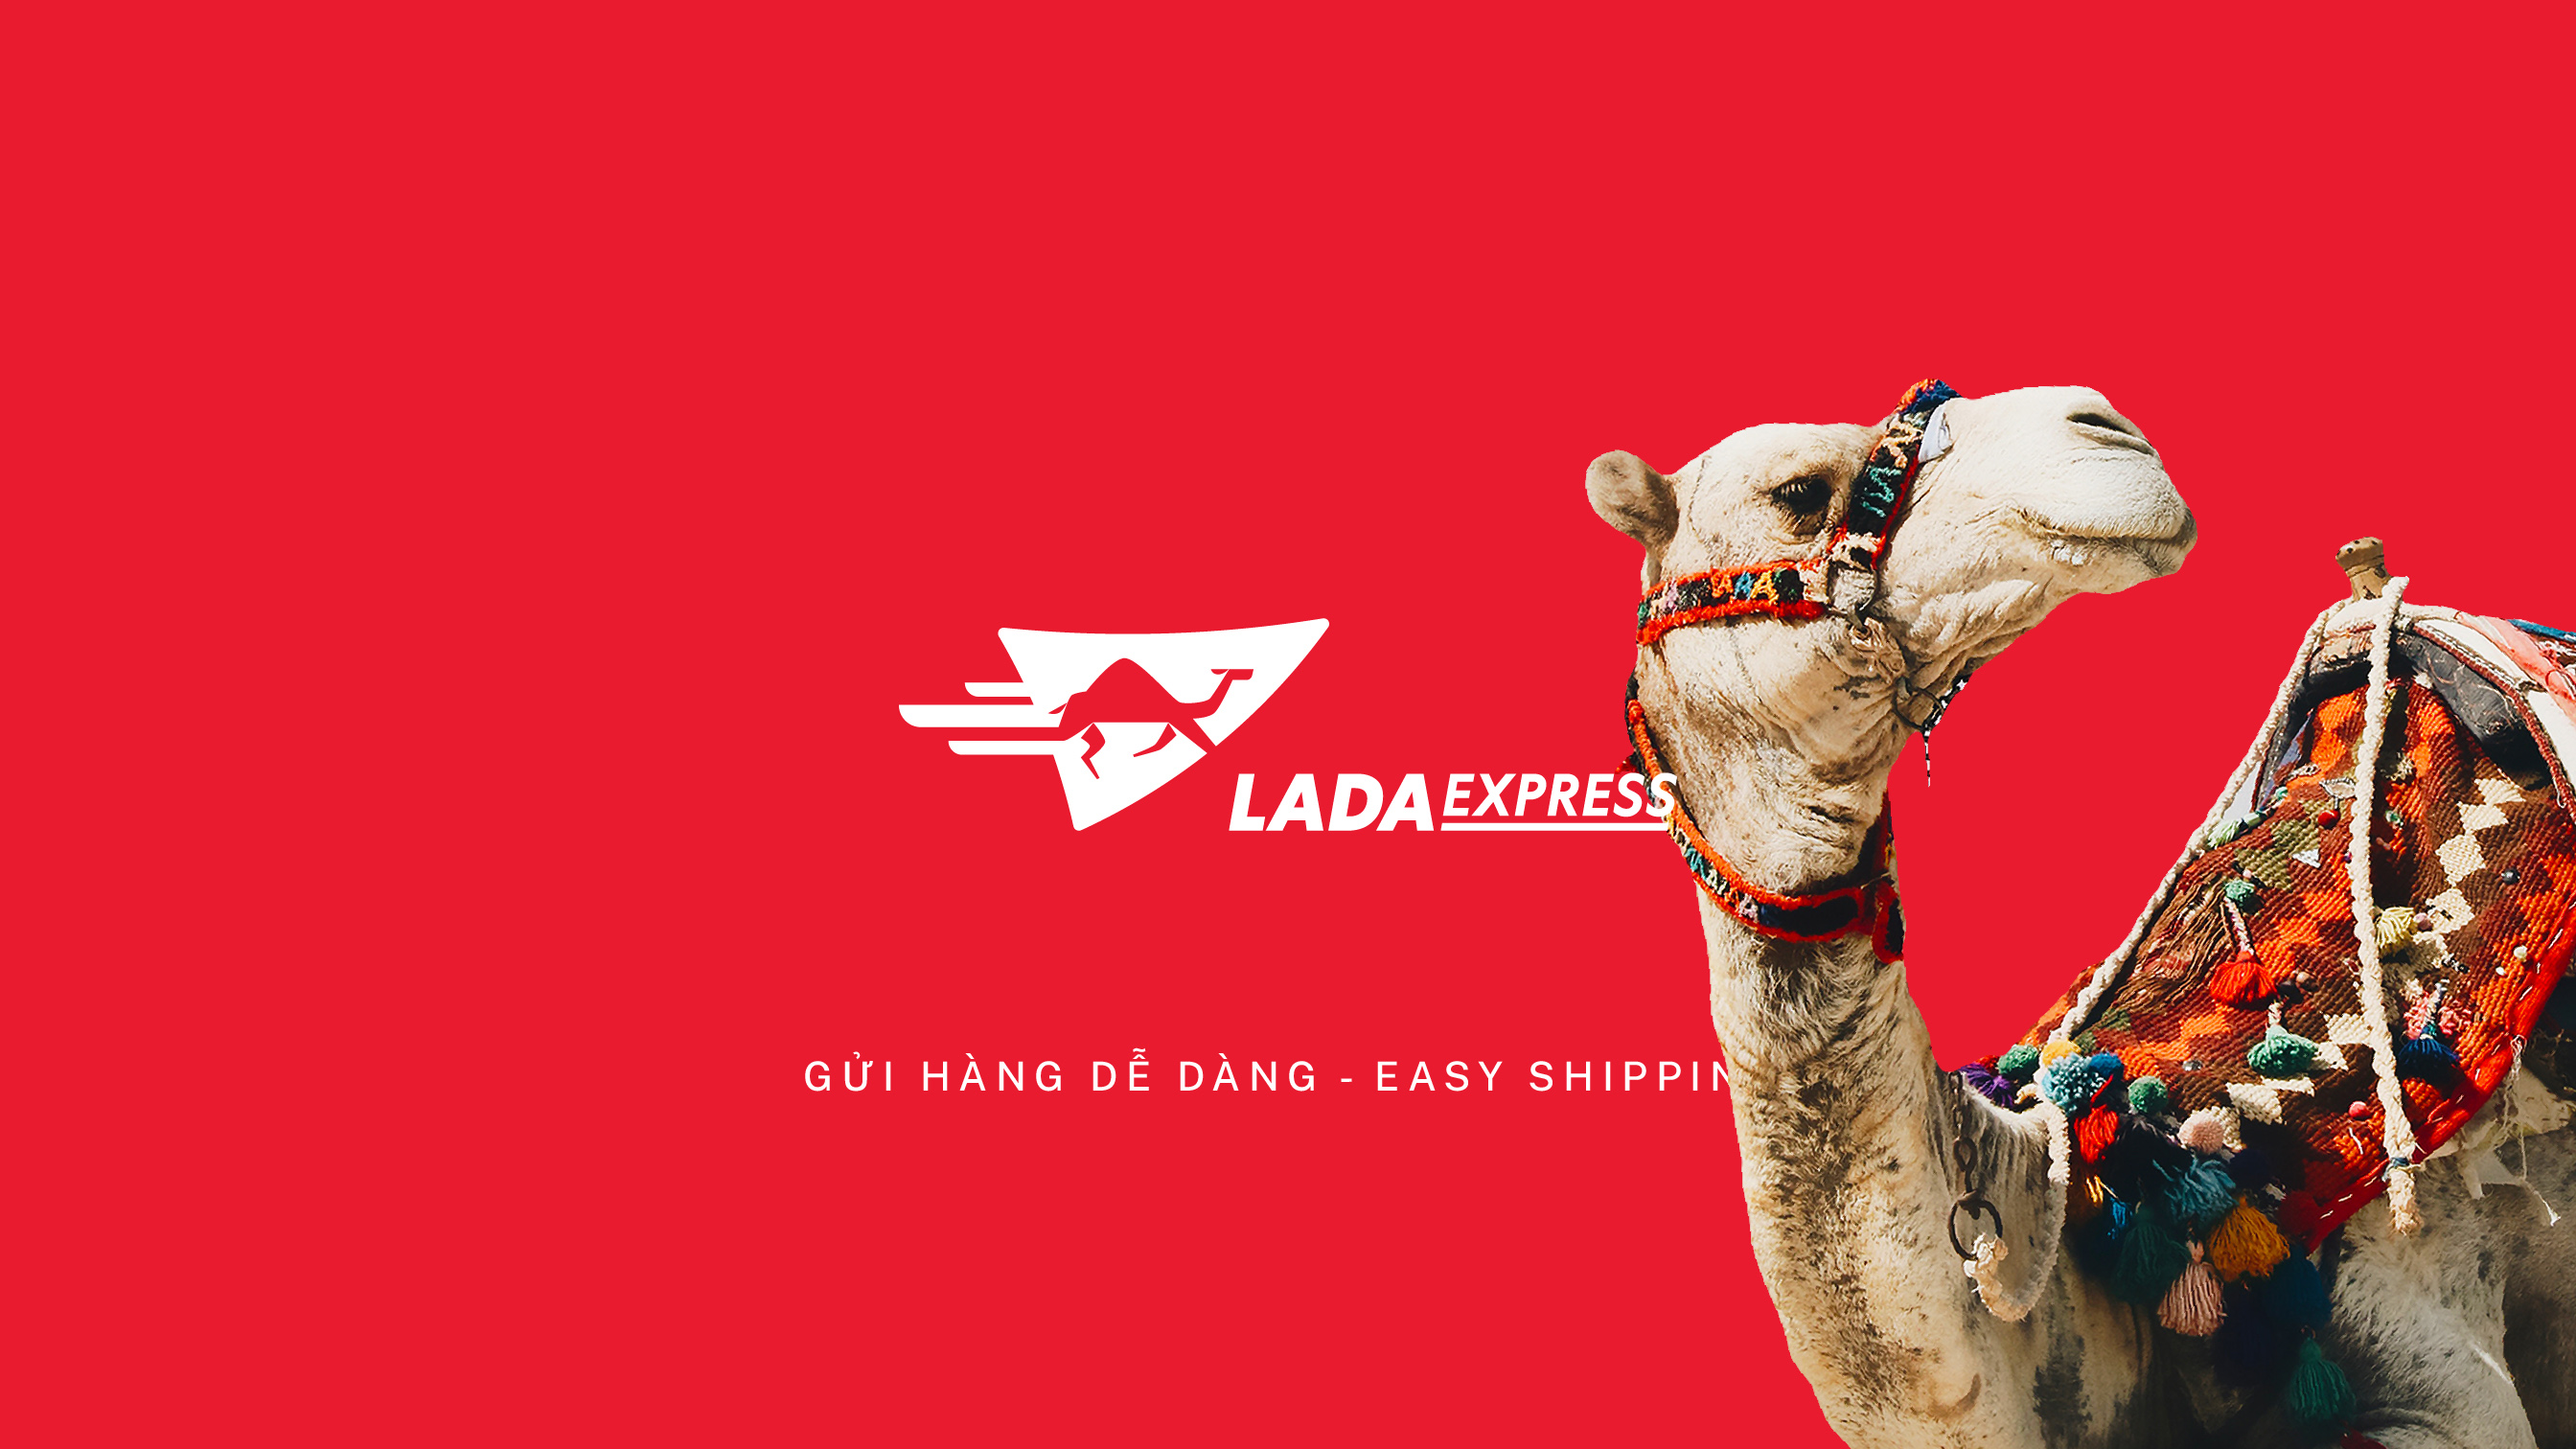 Brand Identity for Lada Express